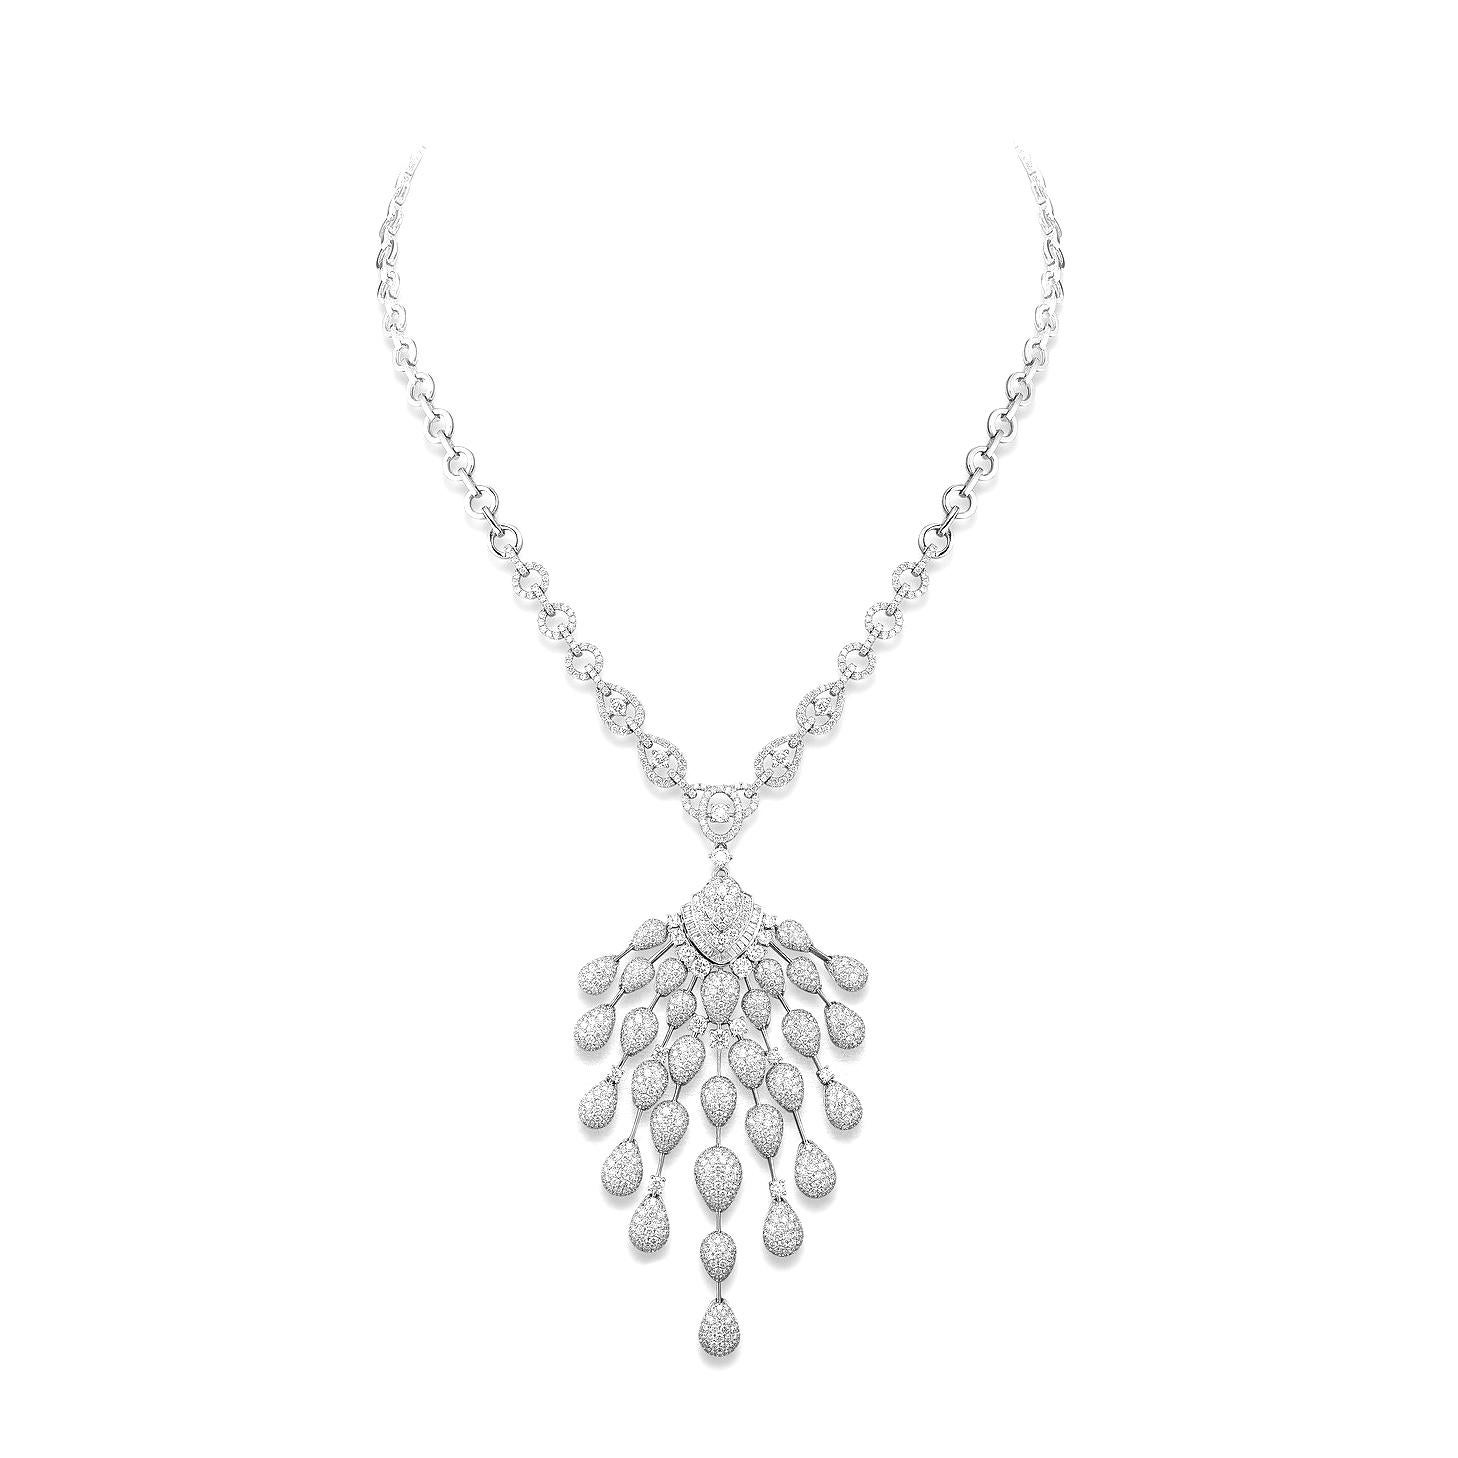 Necklace in 18kt white gold set with 1333 diamonds 13.42 cts and 23 tapers cut diamonds 0.25 cts 